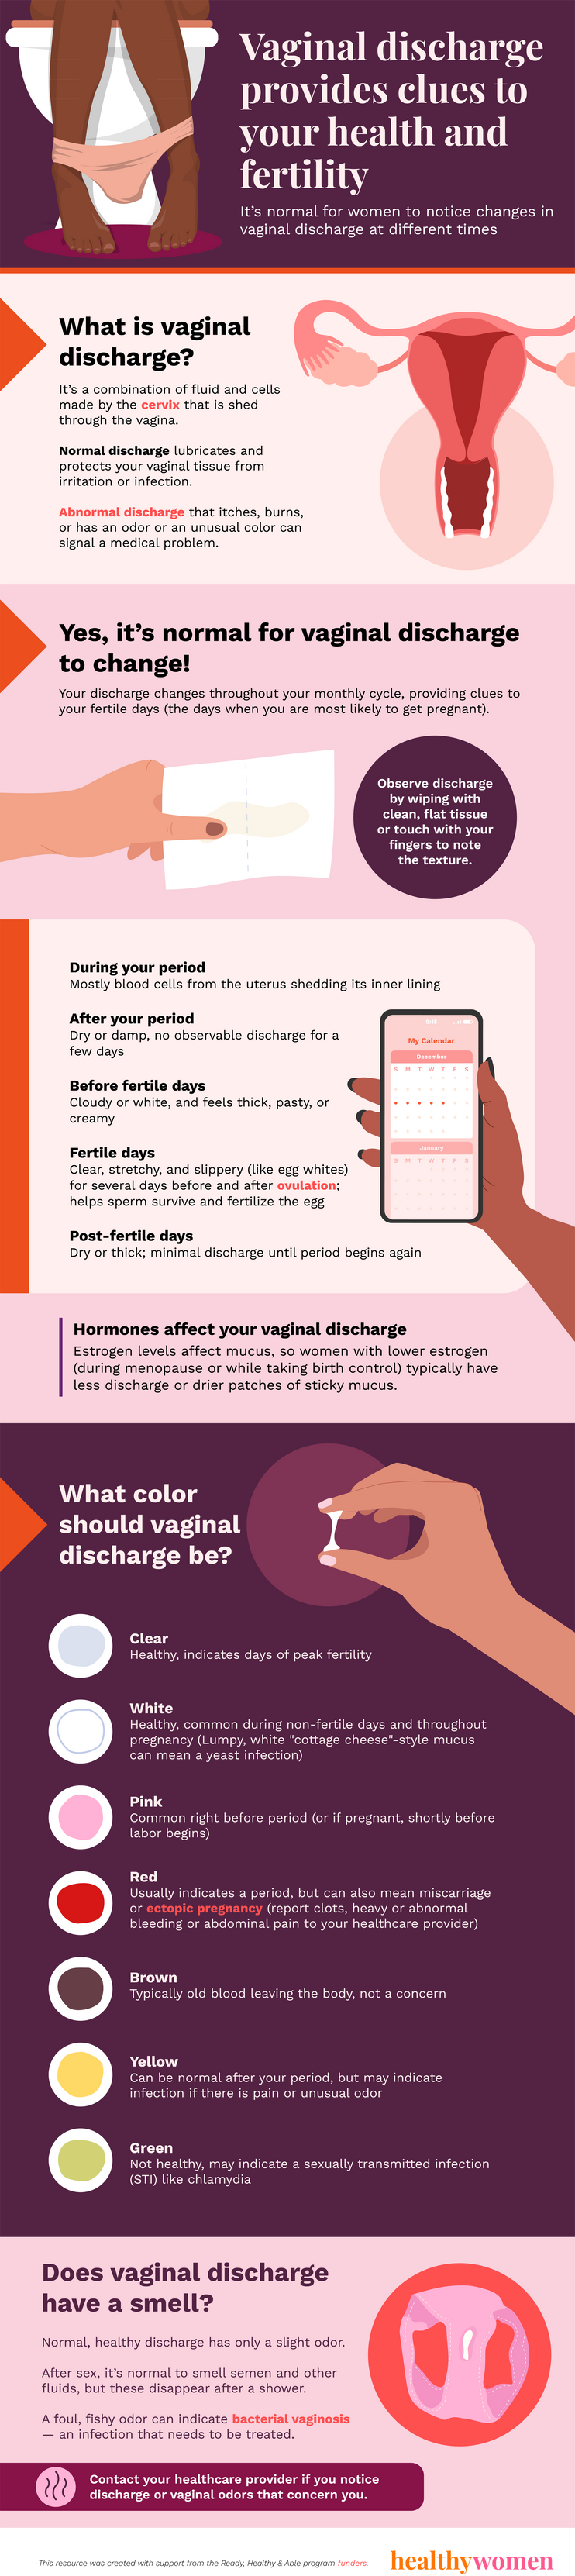 VAGINAL DISCHARGE: IS IT DANGEROUS OR NORMAL?